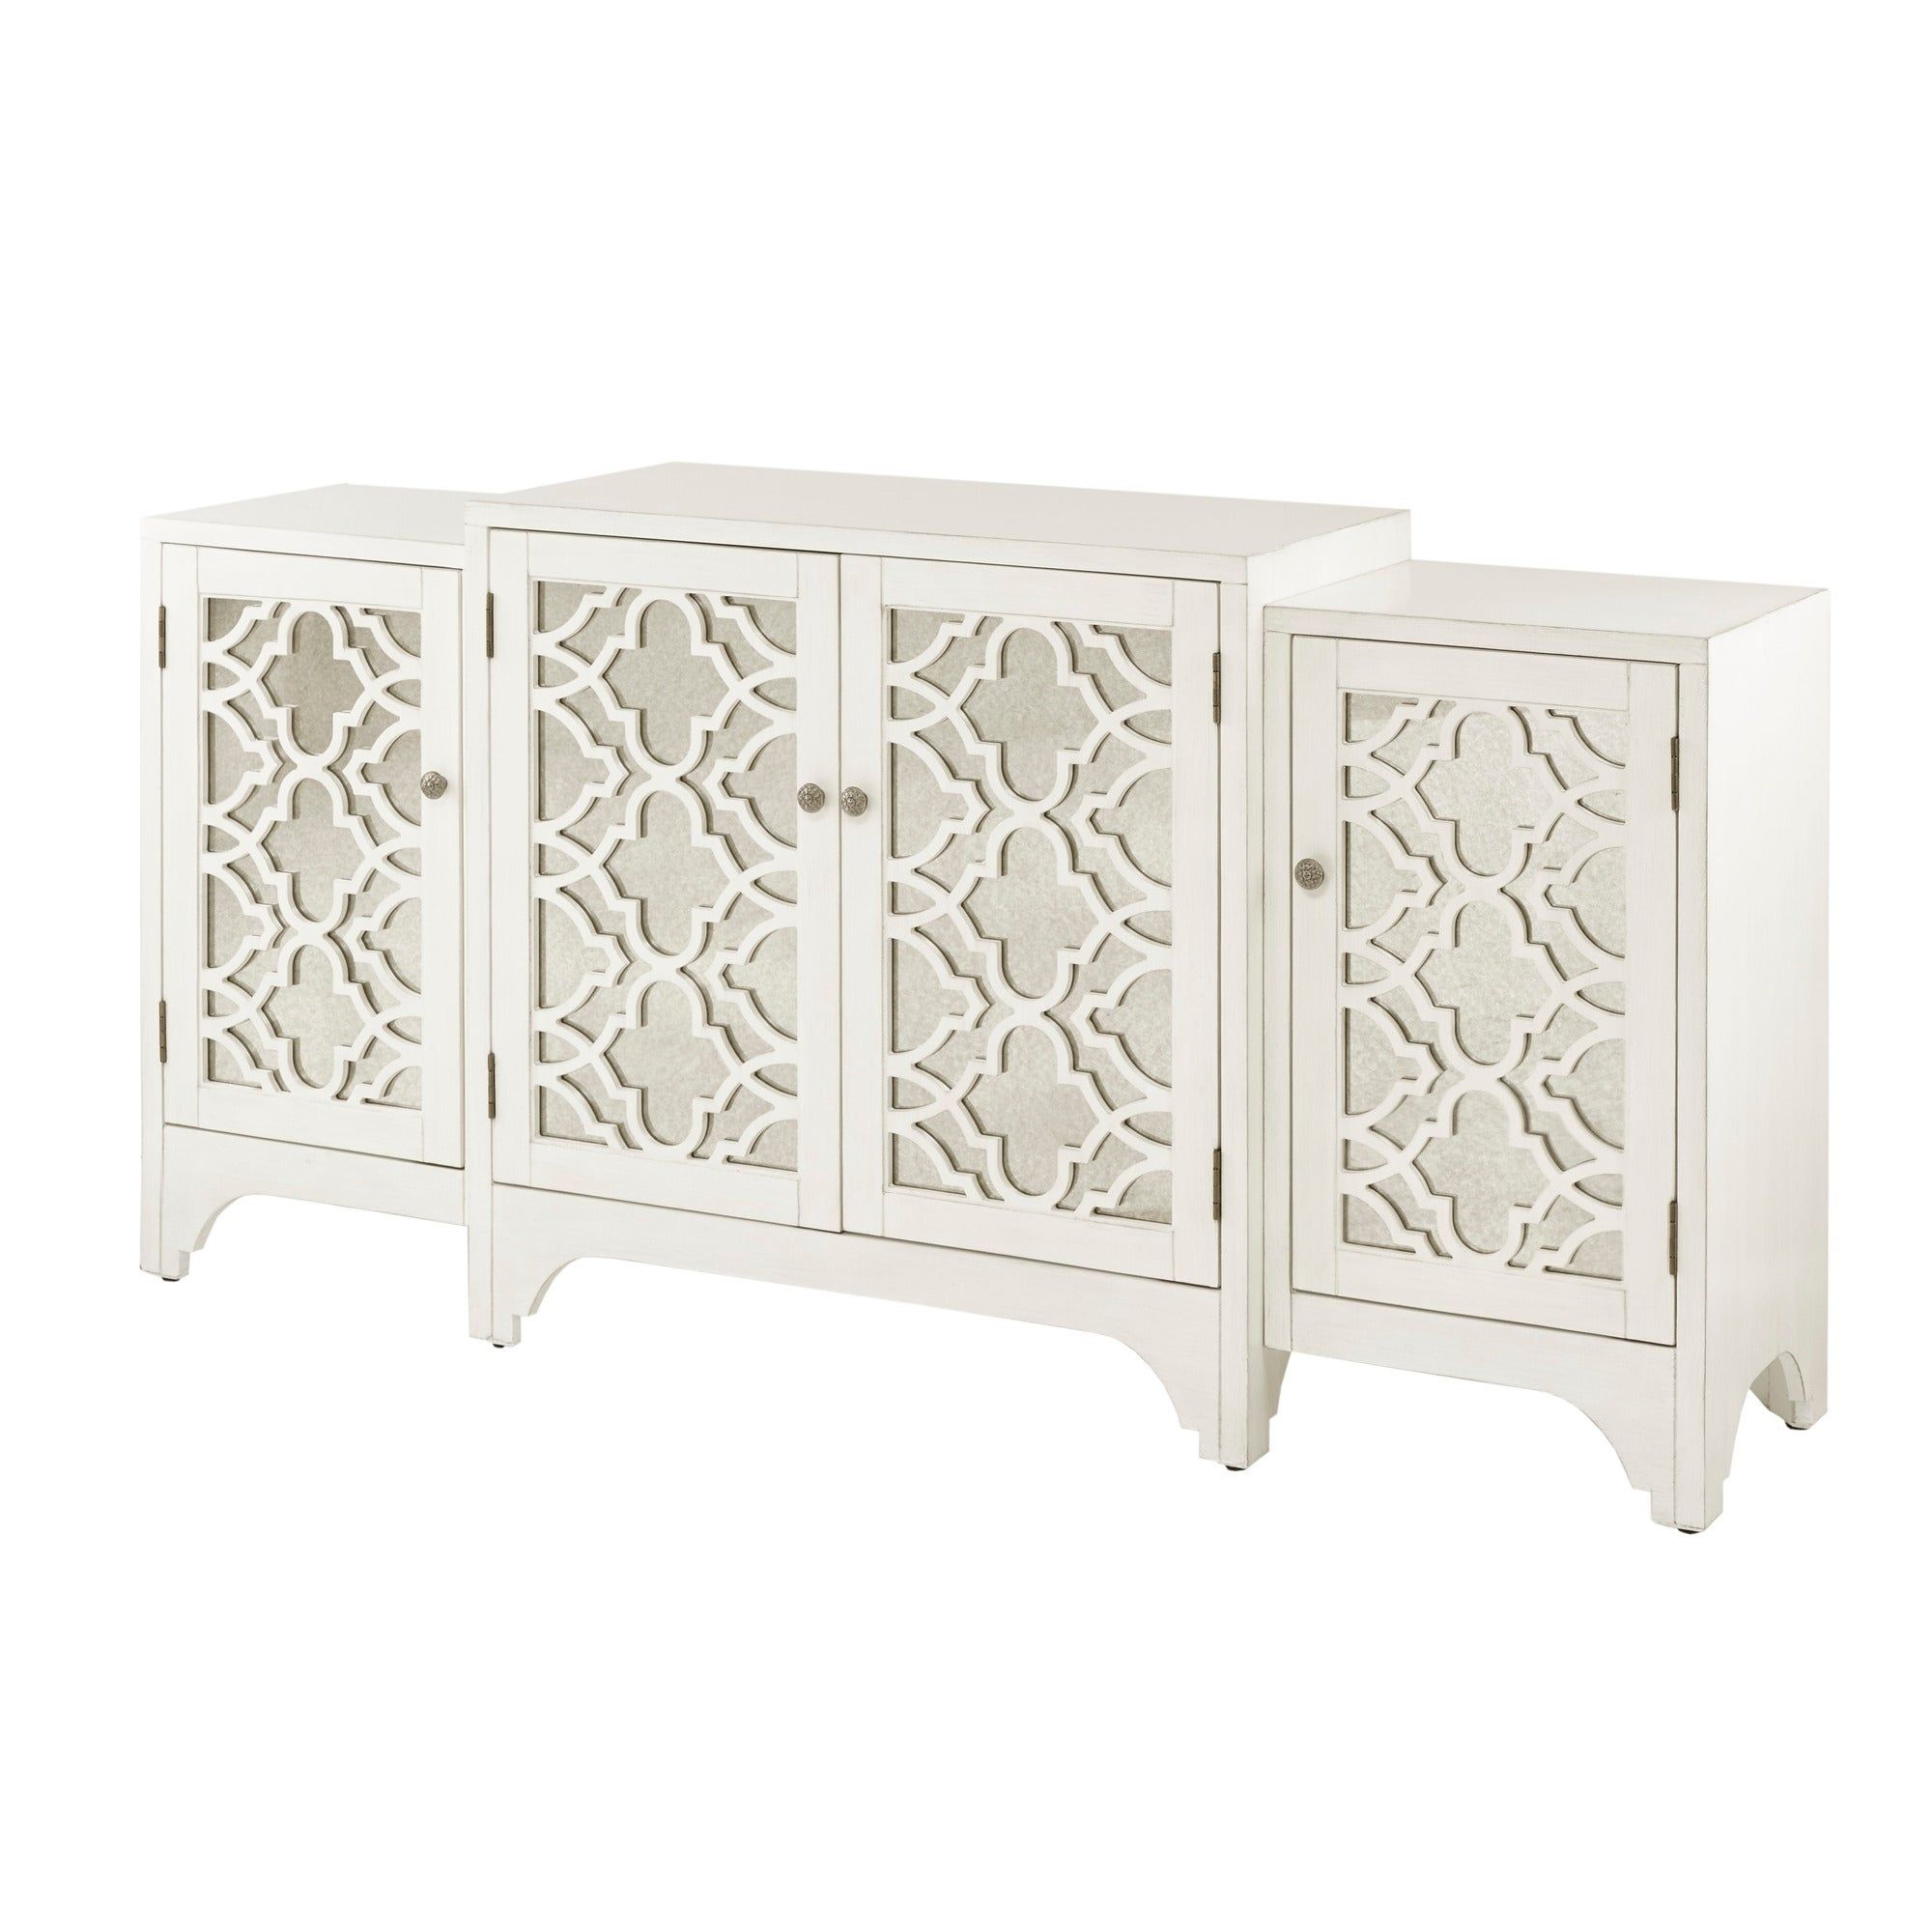 Madison Park Nevaeh Cream Dining Buffet Server Quatrefoil Design With  Mirrored Doors With Mirrored Double Door Buffets (View 17 of 30)